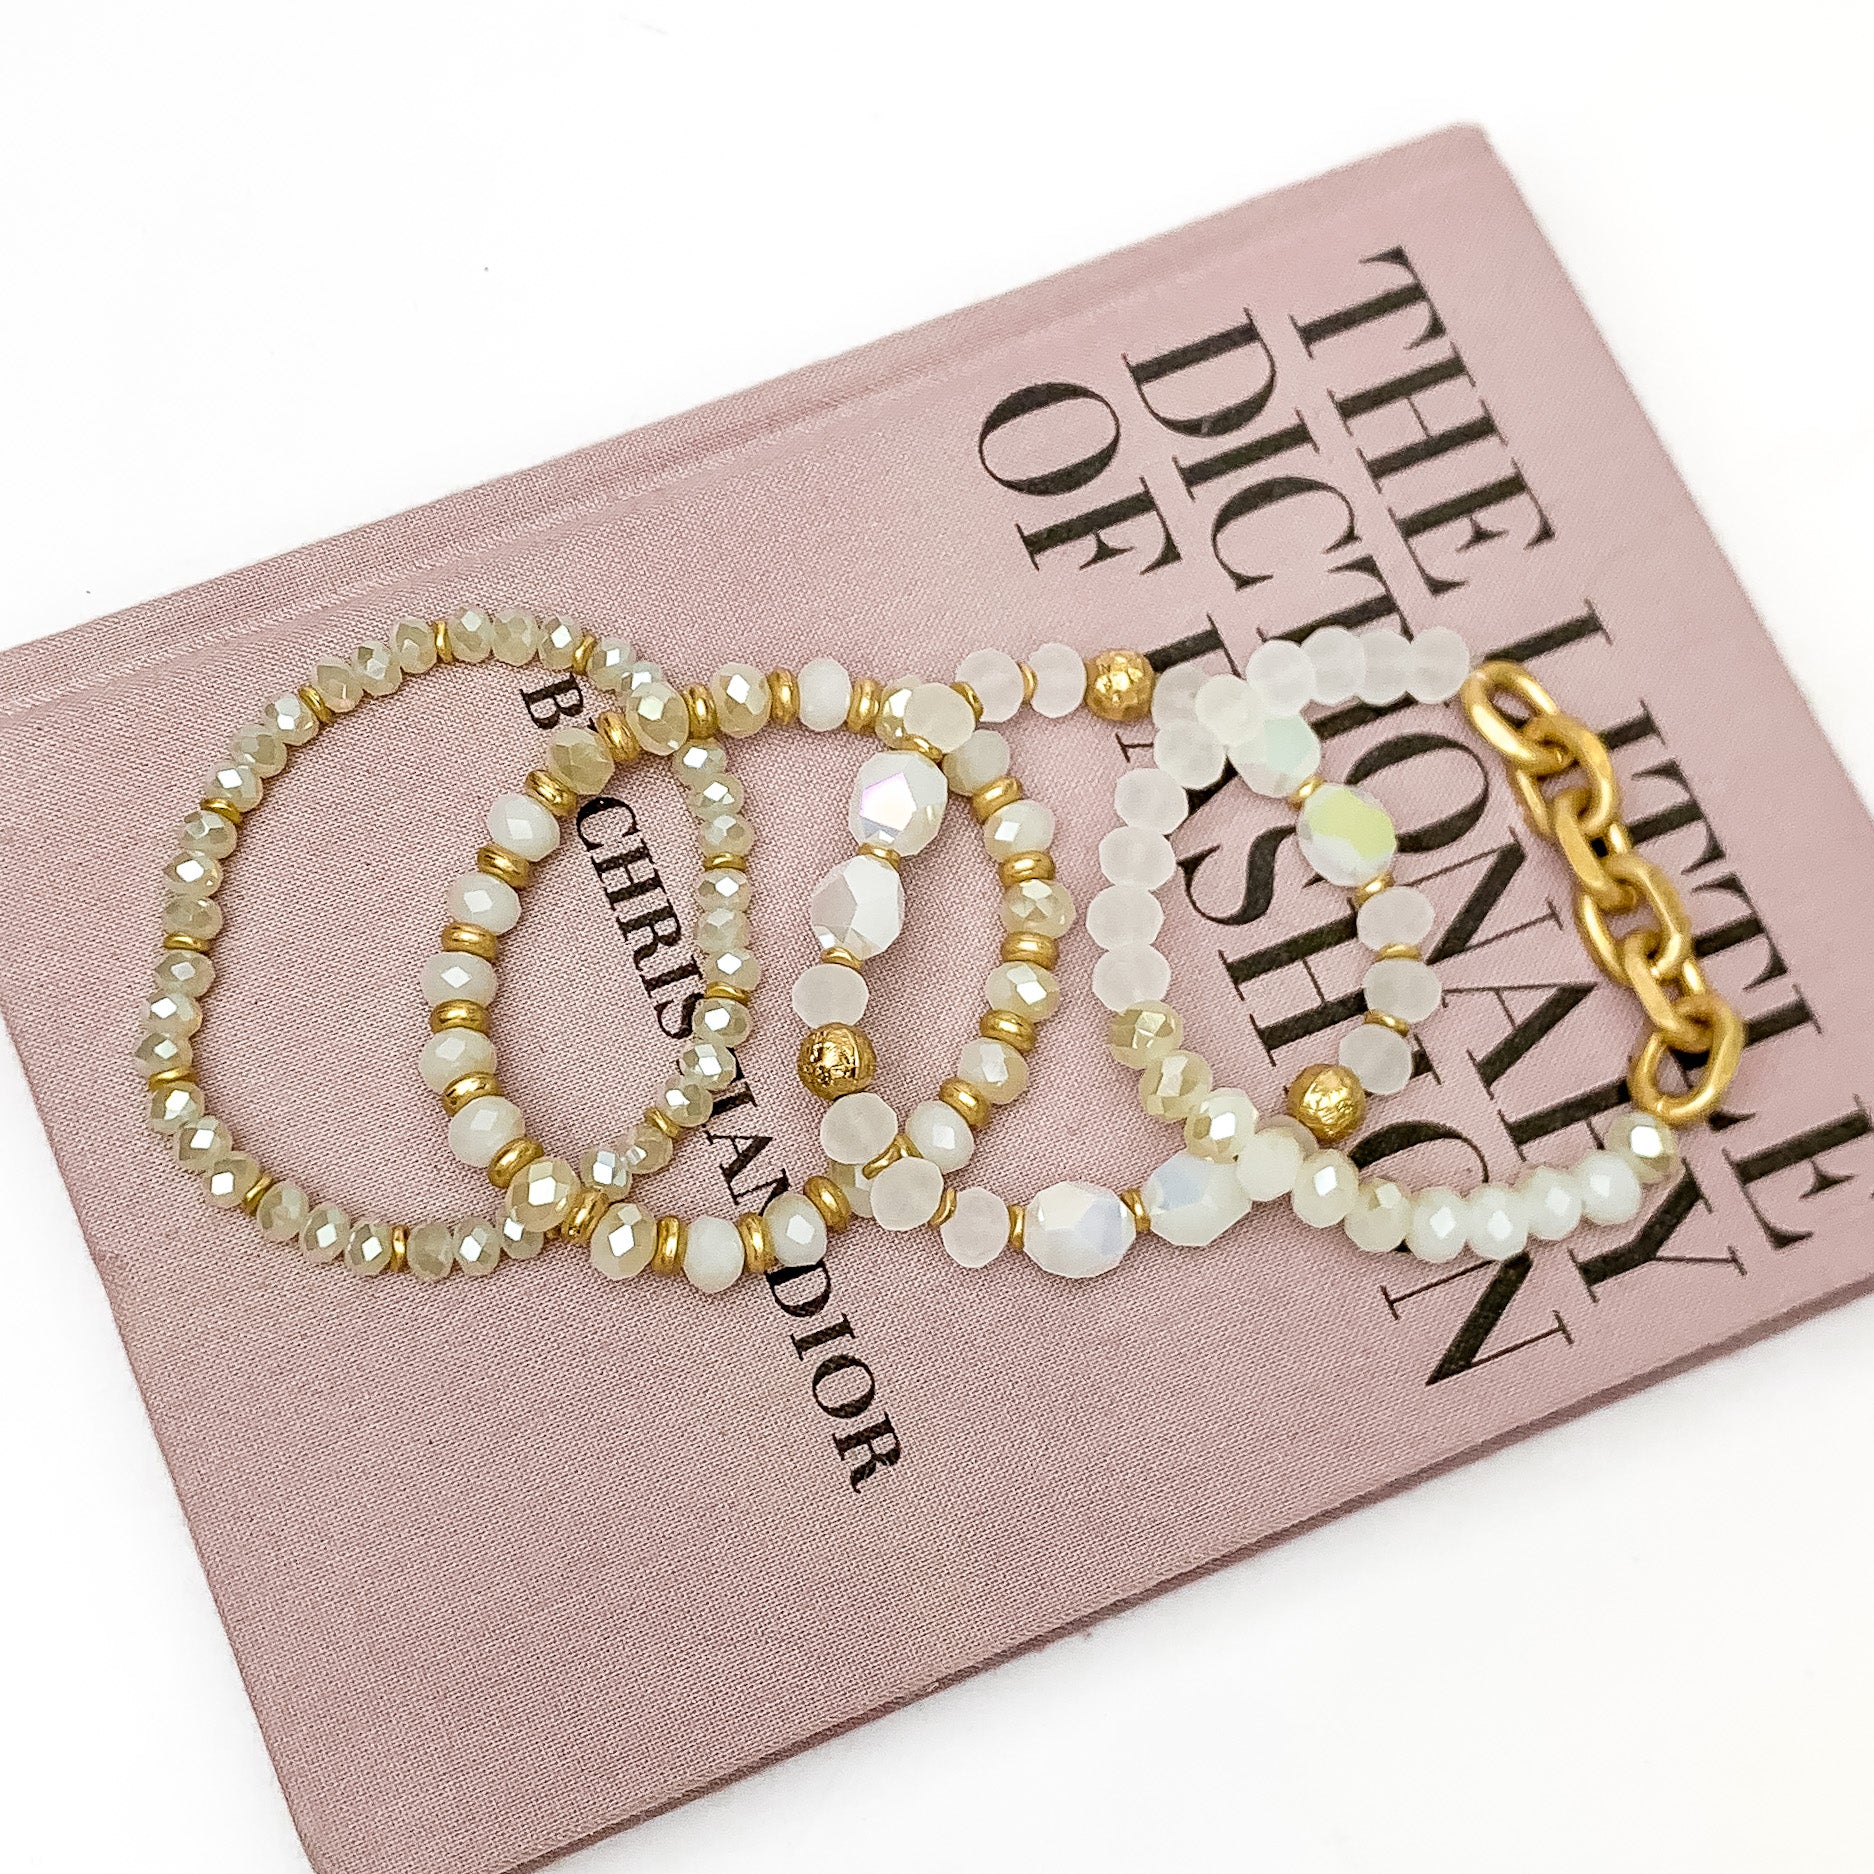 Set of Four | Glorious Gold Crystal Beaded Bracelet Set in White. Pictured laying on a closed book. The book is on a white background.